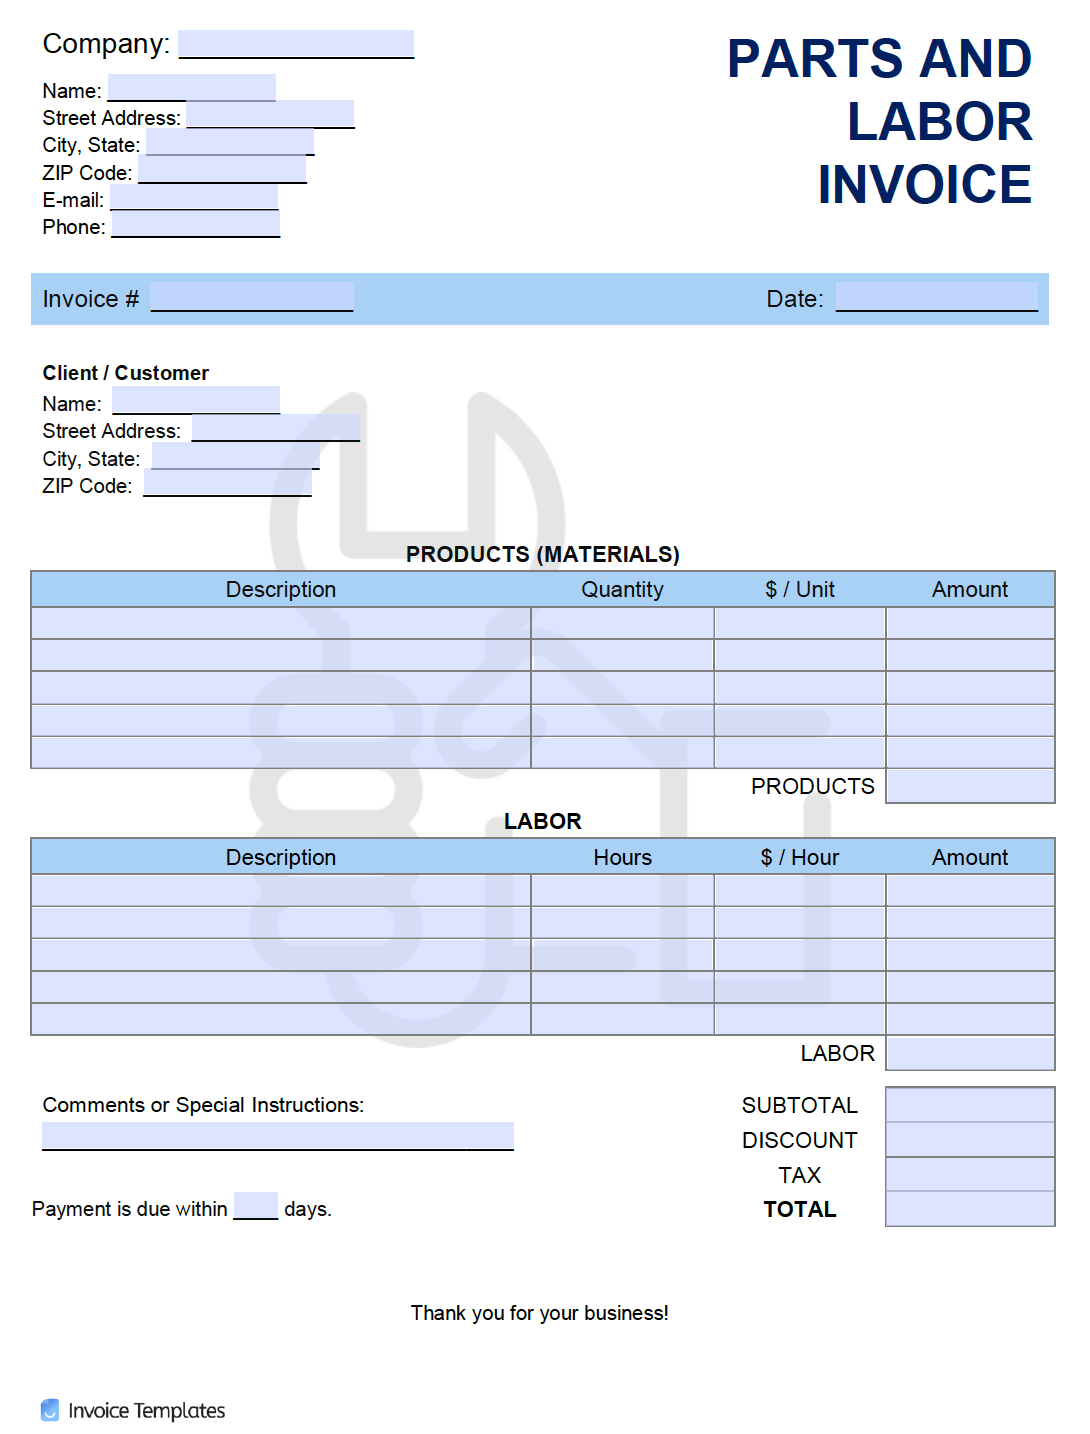 Free Parts and Labor Invoice Template  PDF  WORD  EXCEL For Parts And Labor Invoice Template Free